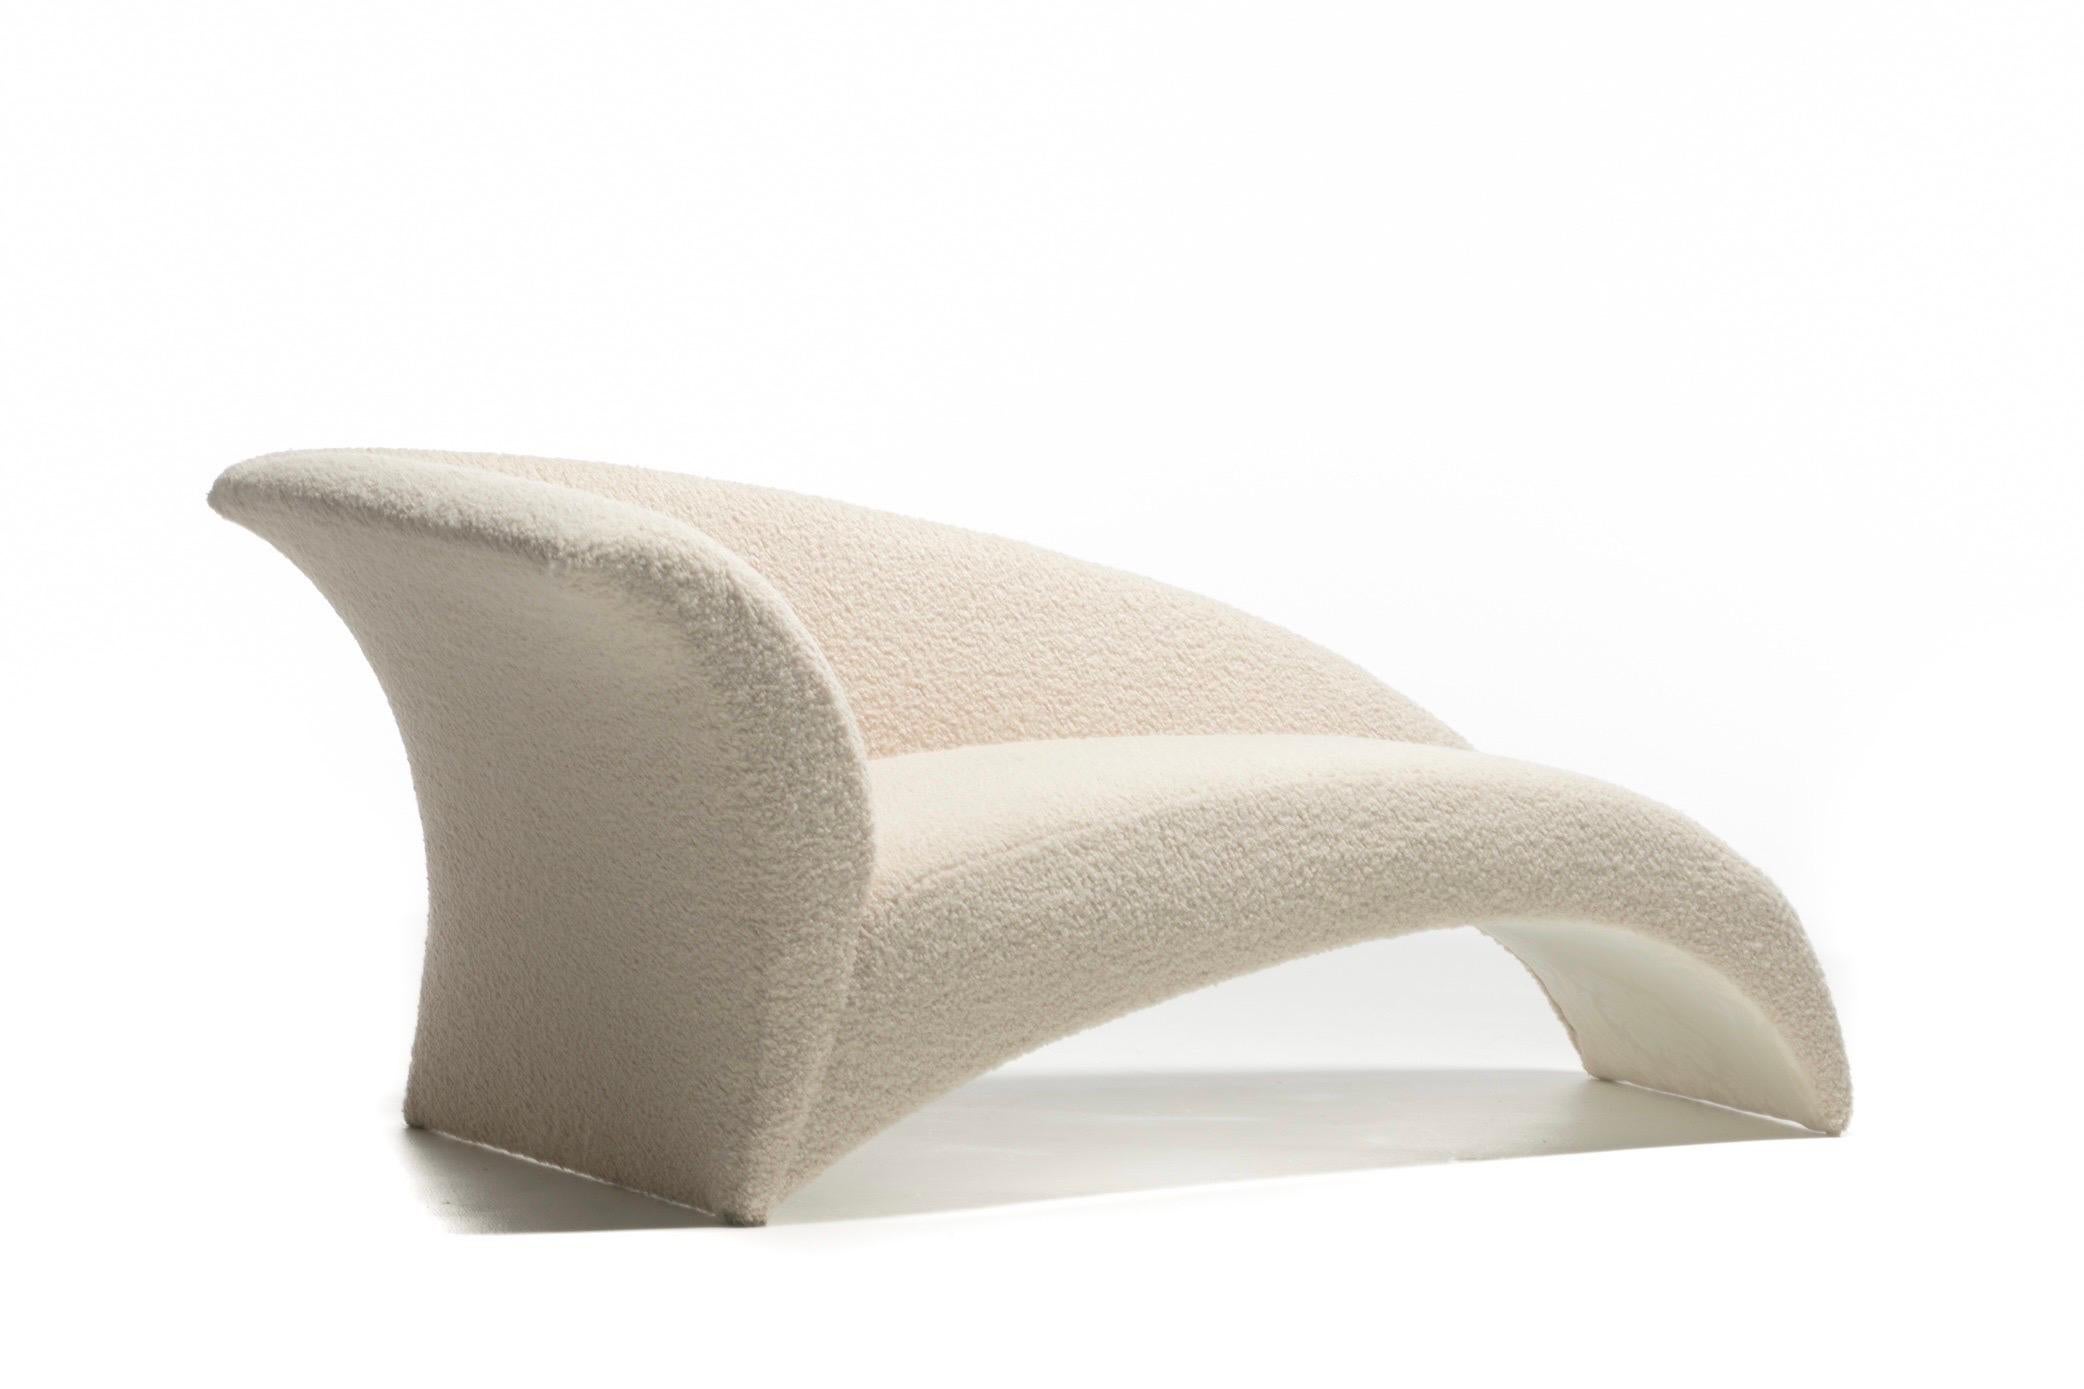 A true sculptural work of art, whisk yourself away in this exquisite Post Modern Chaise Lounge by renowned Designer Vladimir Kagan for Directional. Modern glam. Chic and high art without a doubt. Unlike traditional chaise lounges that seem to anchor